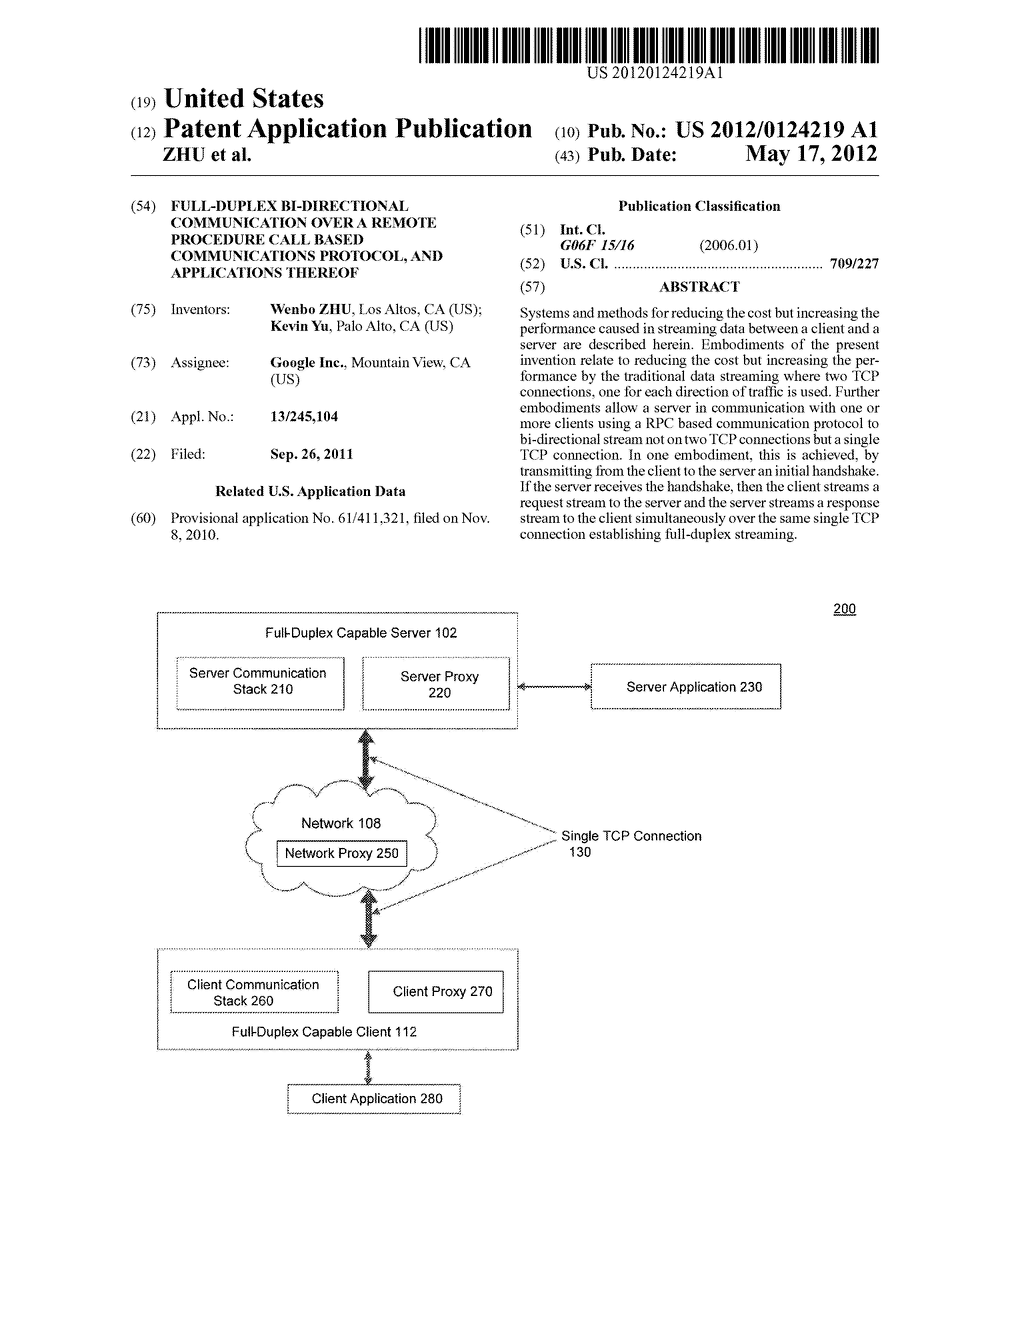 Full-Duplex Bi-Directional Communication Over a Remote Procedure Call     Based Communications Protocol, and Applications Thereof - diagram, schematic, and image 01